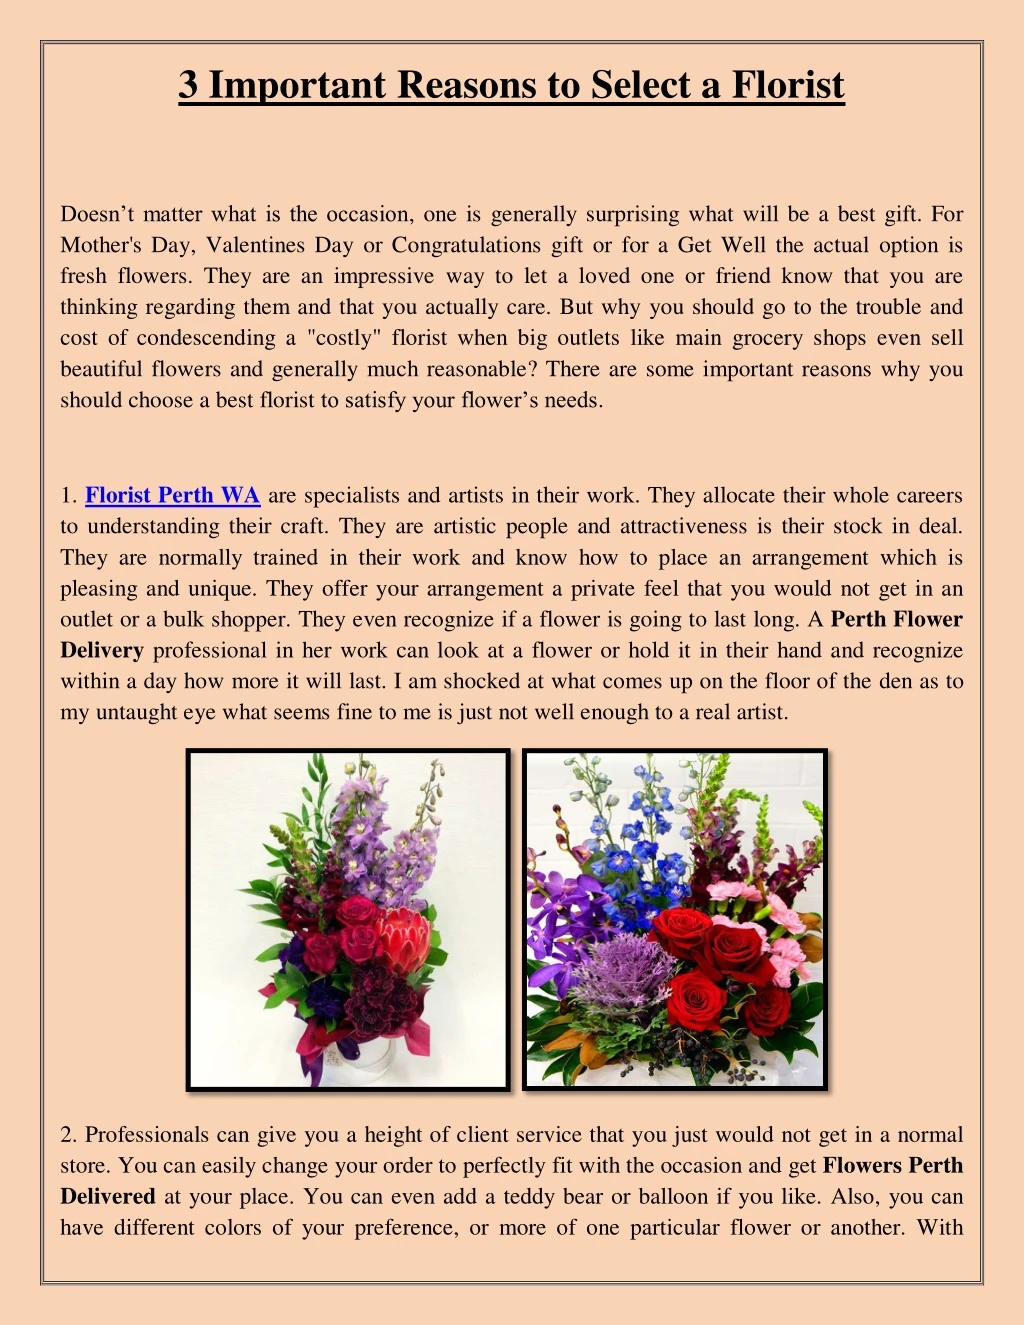 3 important reasons to select a florist